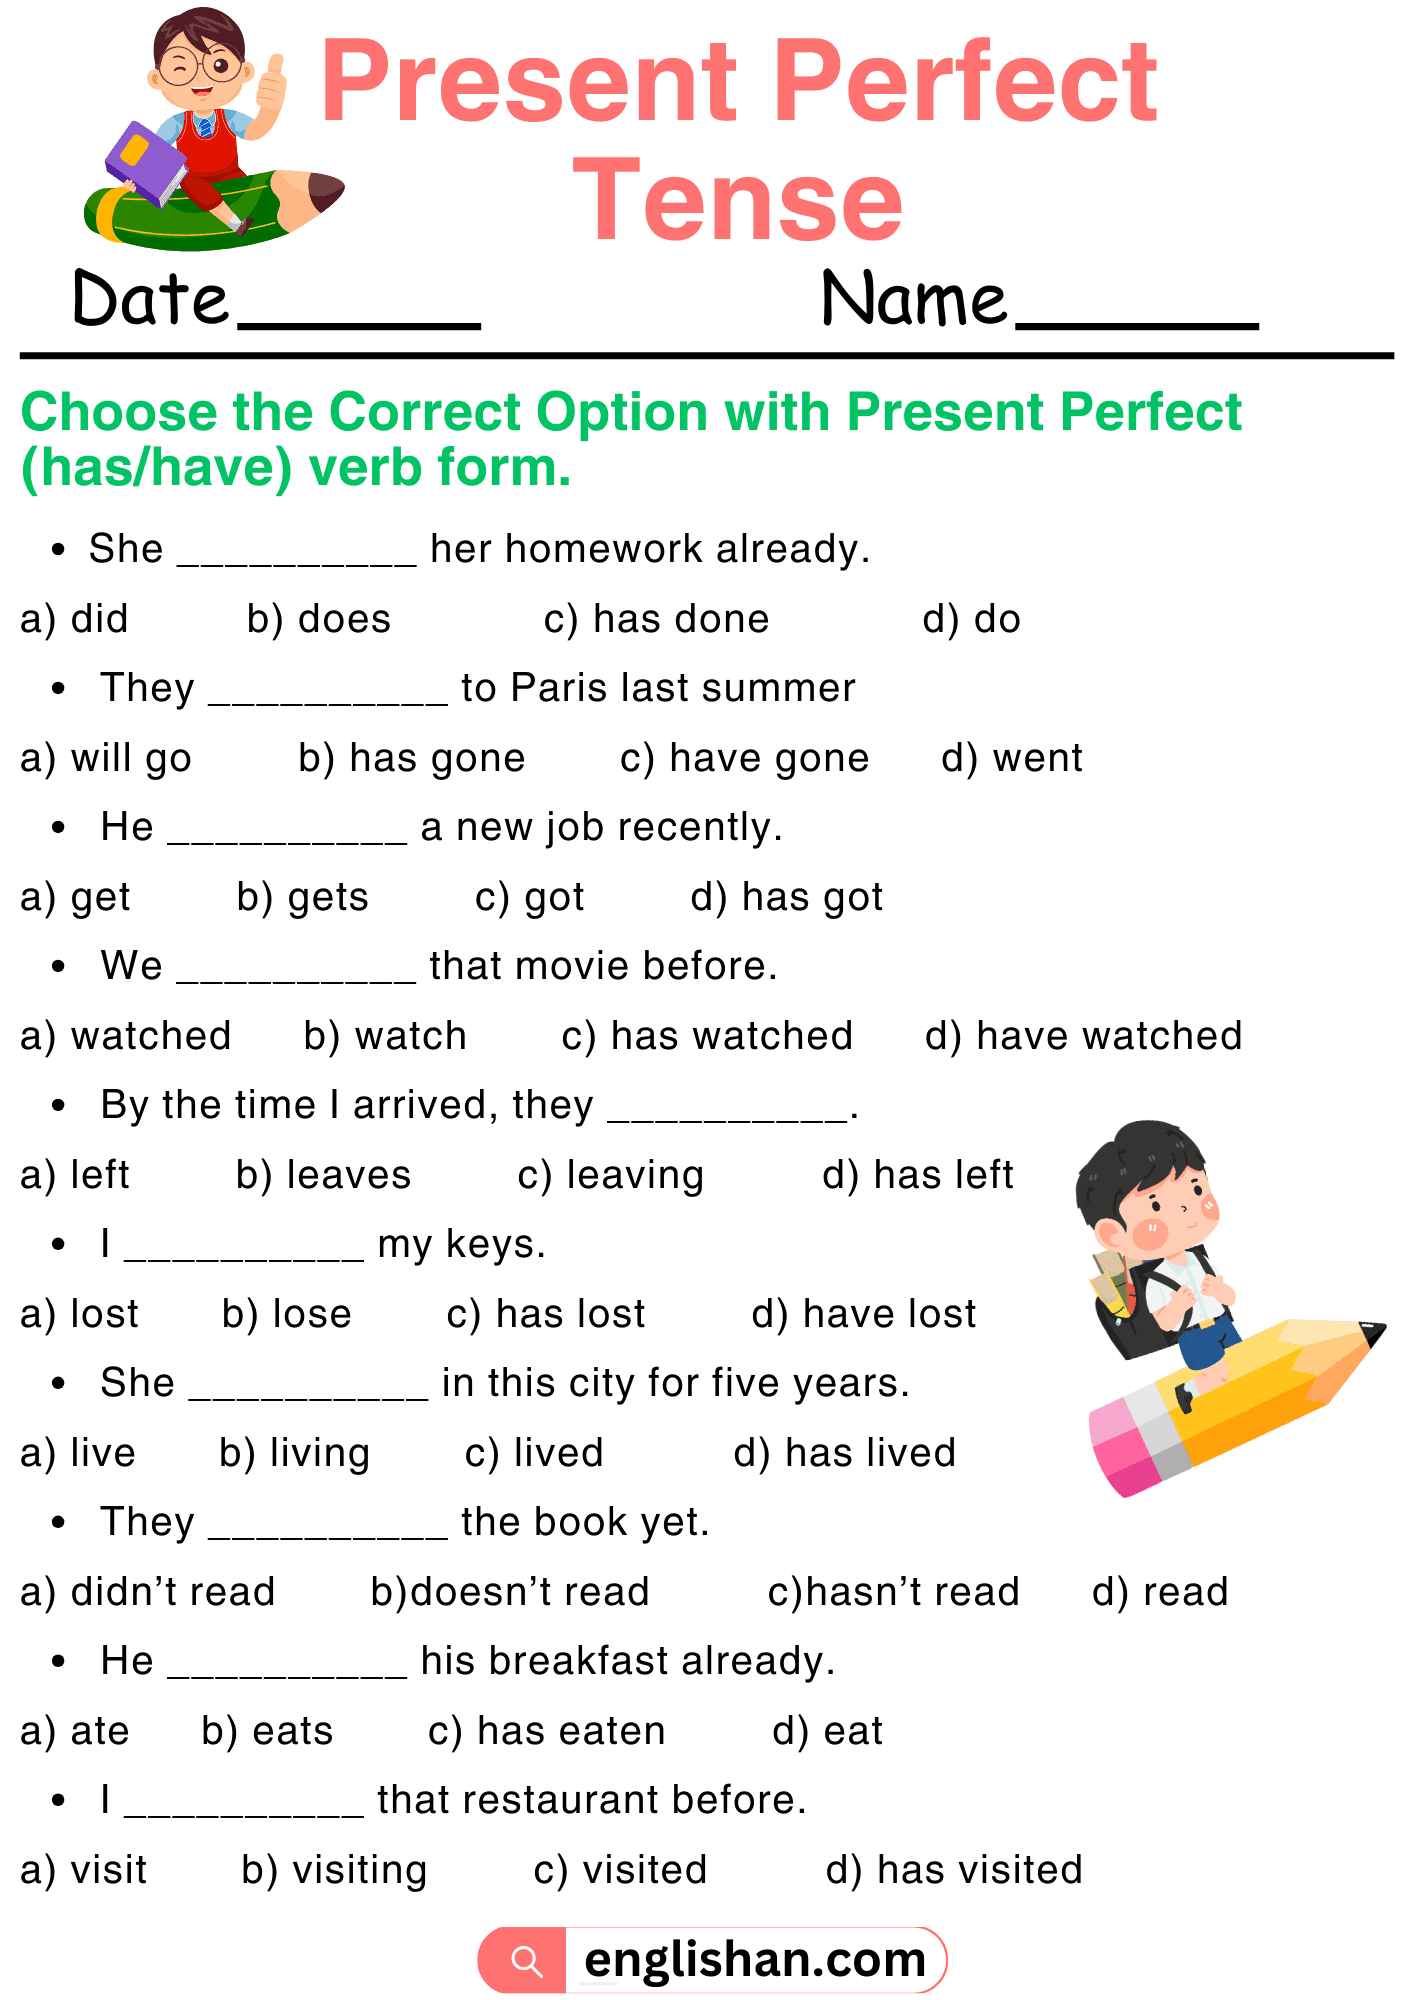 Present Perfect Tense Worksheets and Exercises. 15+ Mcqs using Present Perfect Tense Worksheets